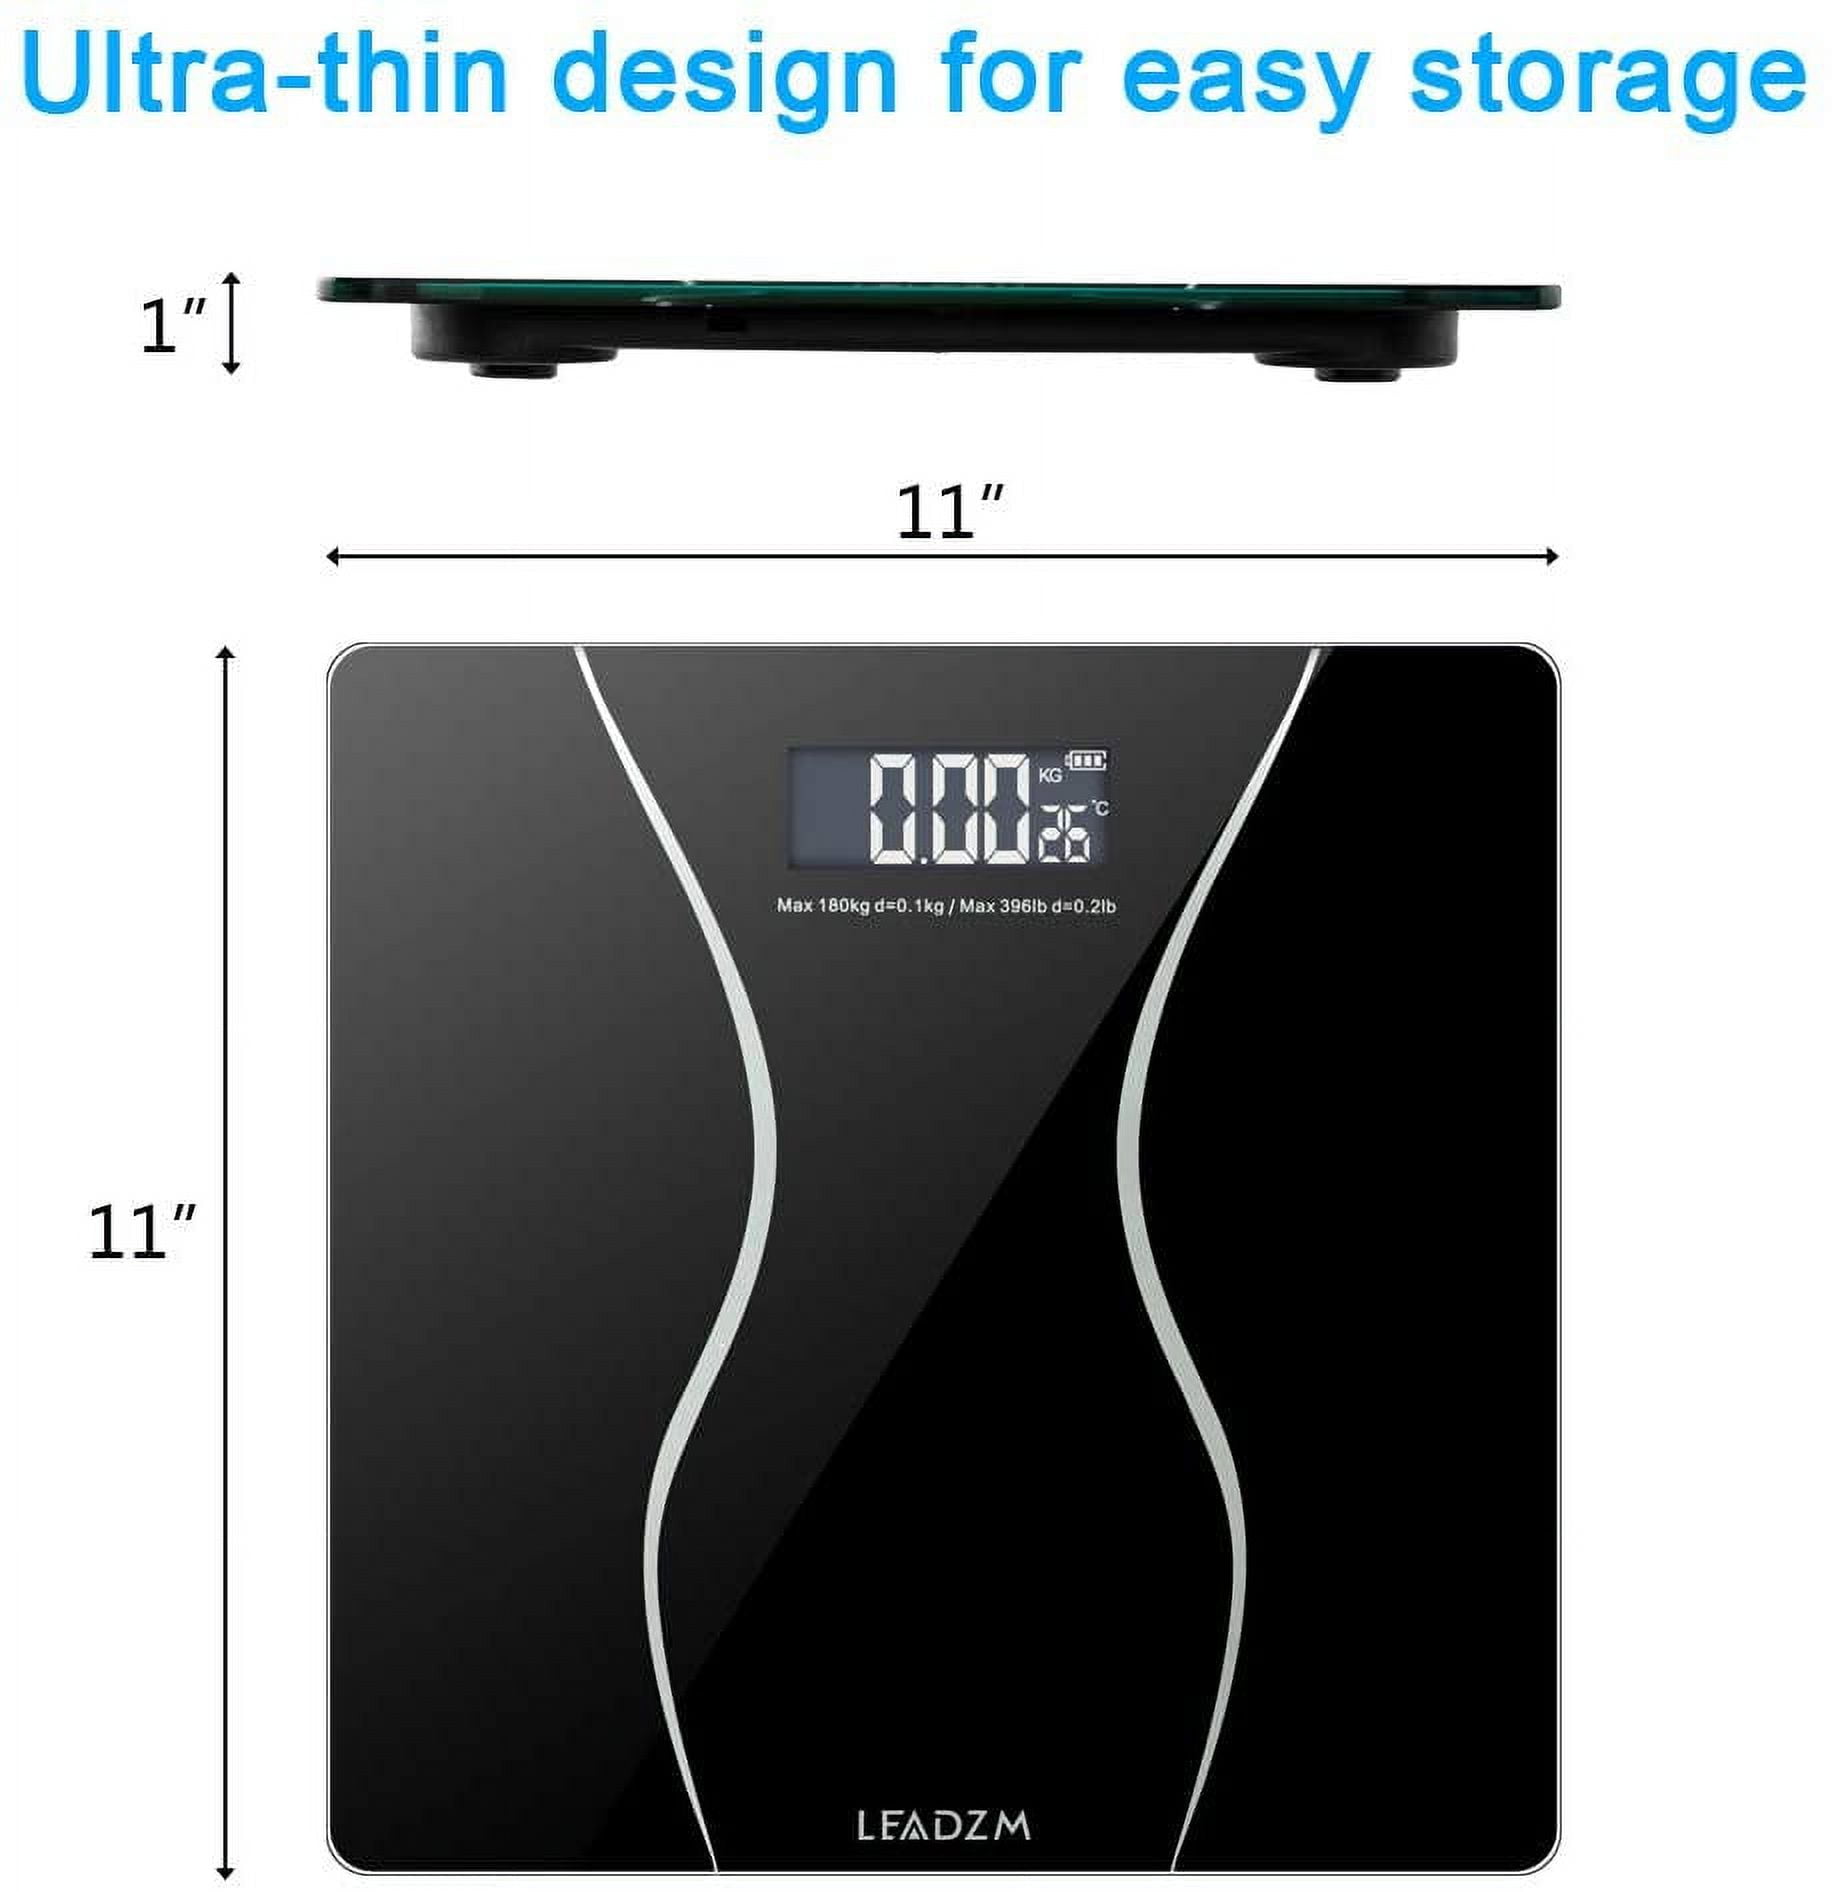 Digital Scale, Body Weight Bathroom Scale 396lb/180kg High Accuracy, Step-On Technology with Lithium Rechargeable Battery. - Pink, New